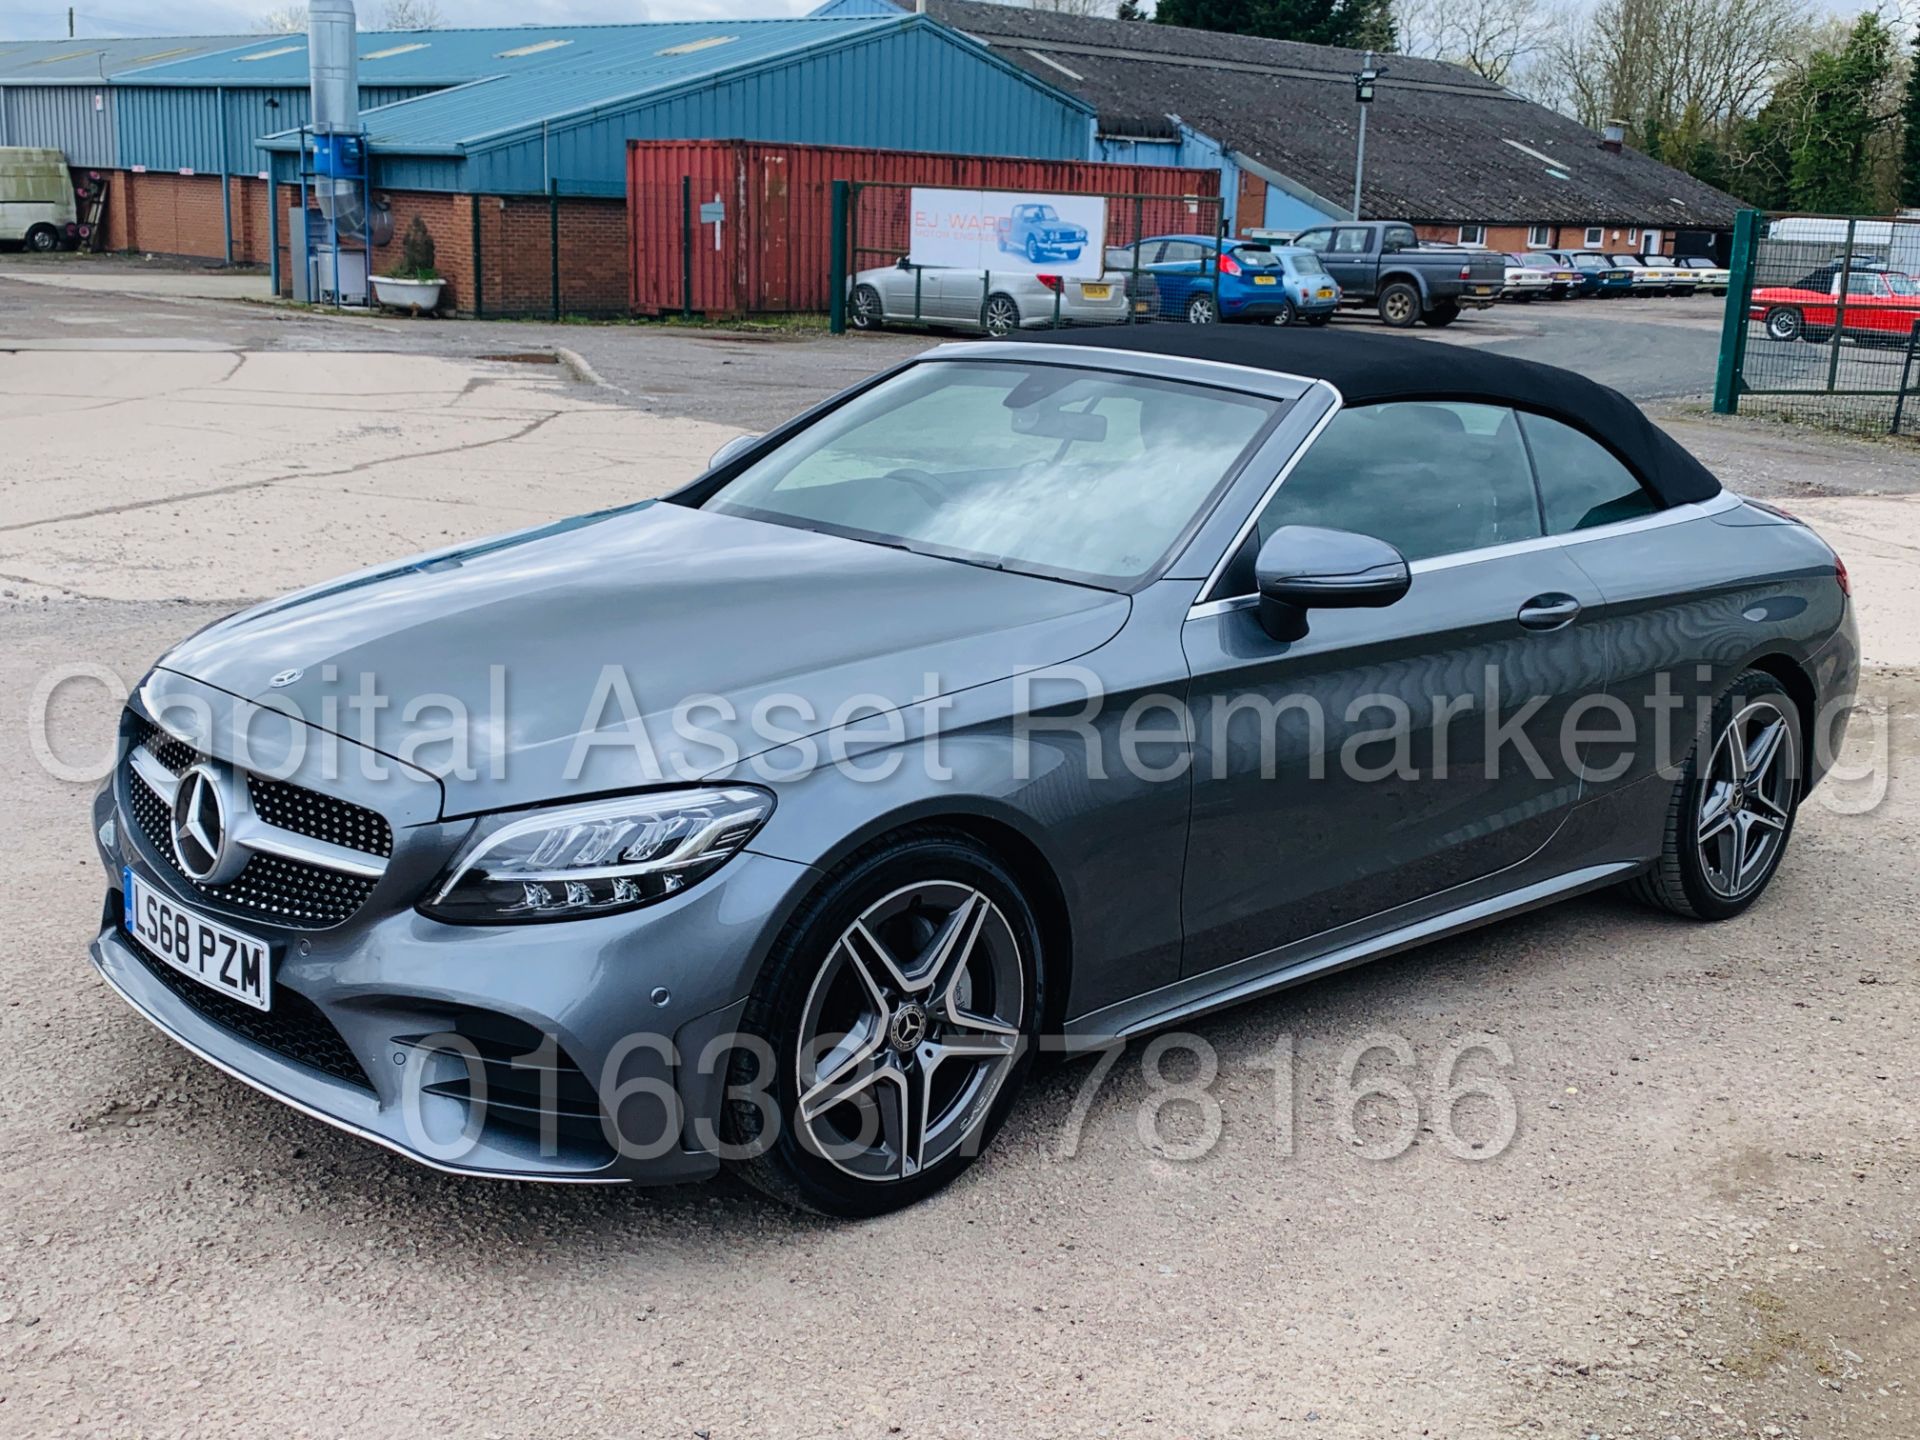 (On Sale) MERCEDES-BENZ C200 *AMG LINE - CABRIOLET* (68 REG) '9-G TRONIC AUTO - DYNAMIC SELECT' - Image 15 of 63